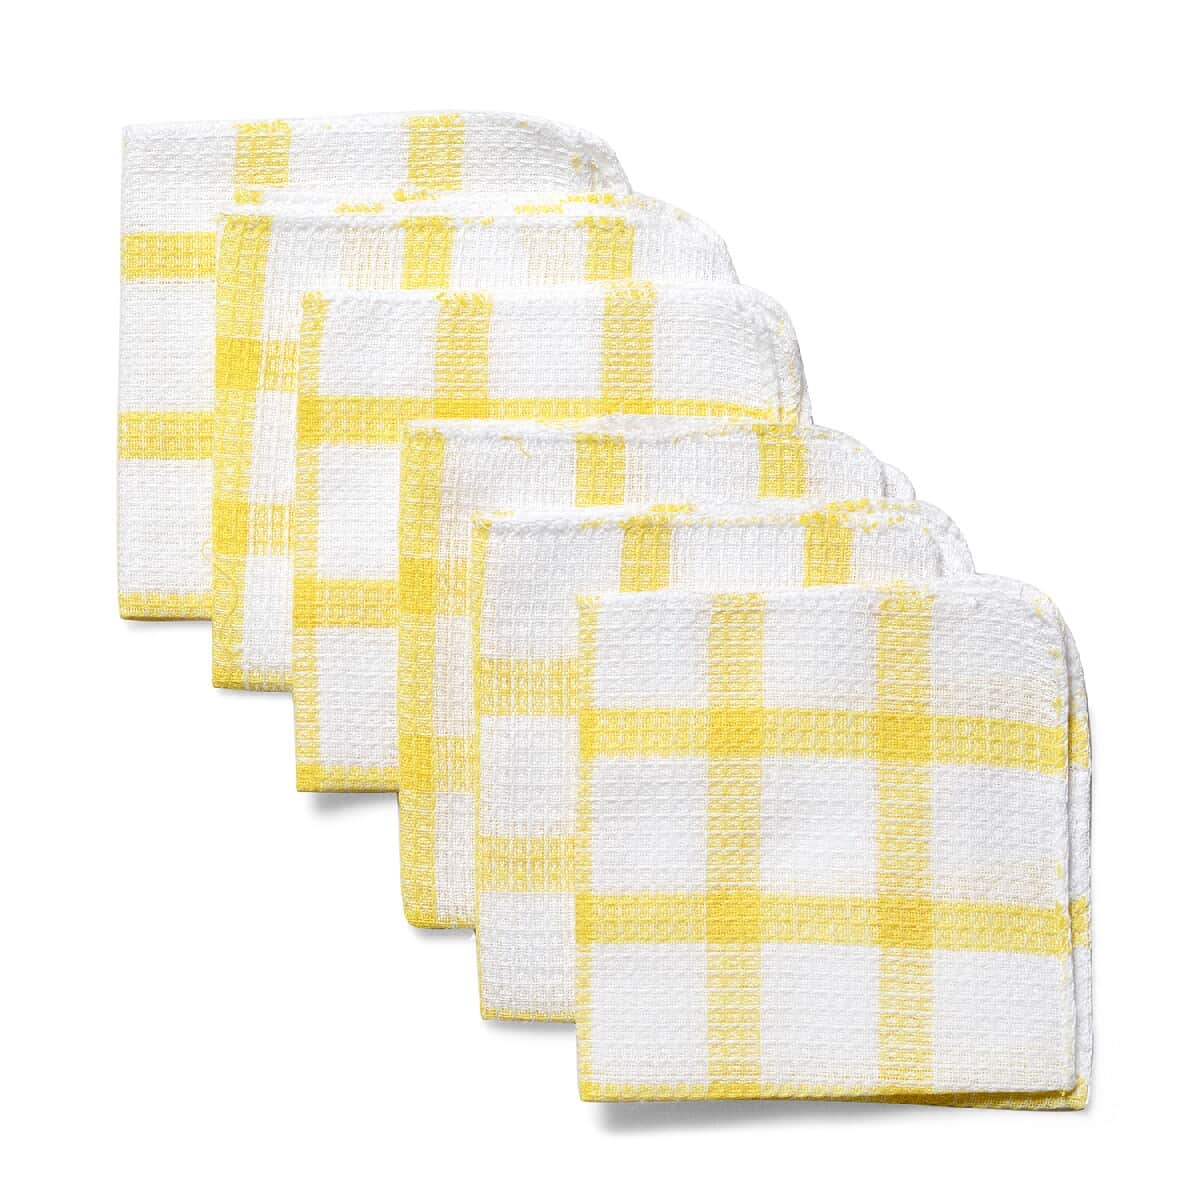 Set of 24 Yellow Cotton Kitchen Towels Dish Cloth Scrubbing Towels Clothes Cleaning Rags Kitchen Essentials image number 2